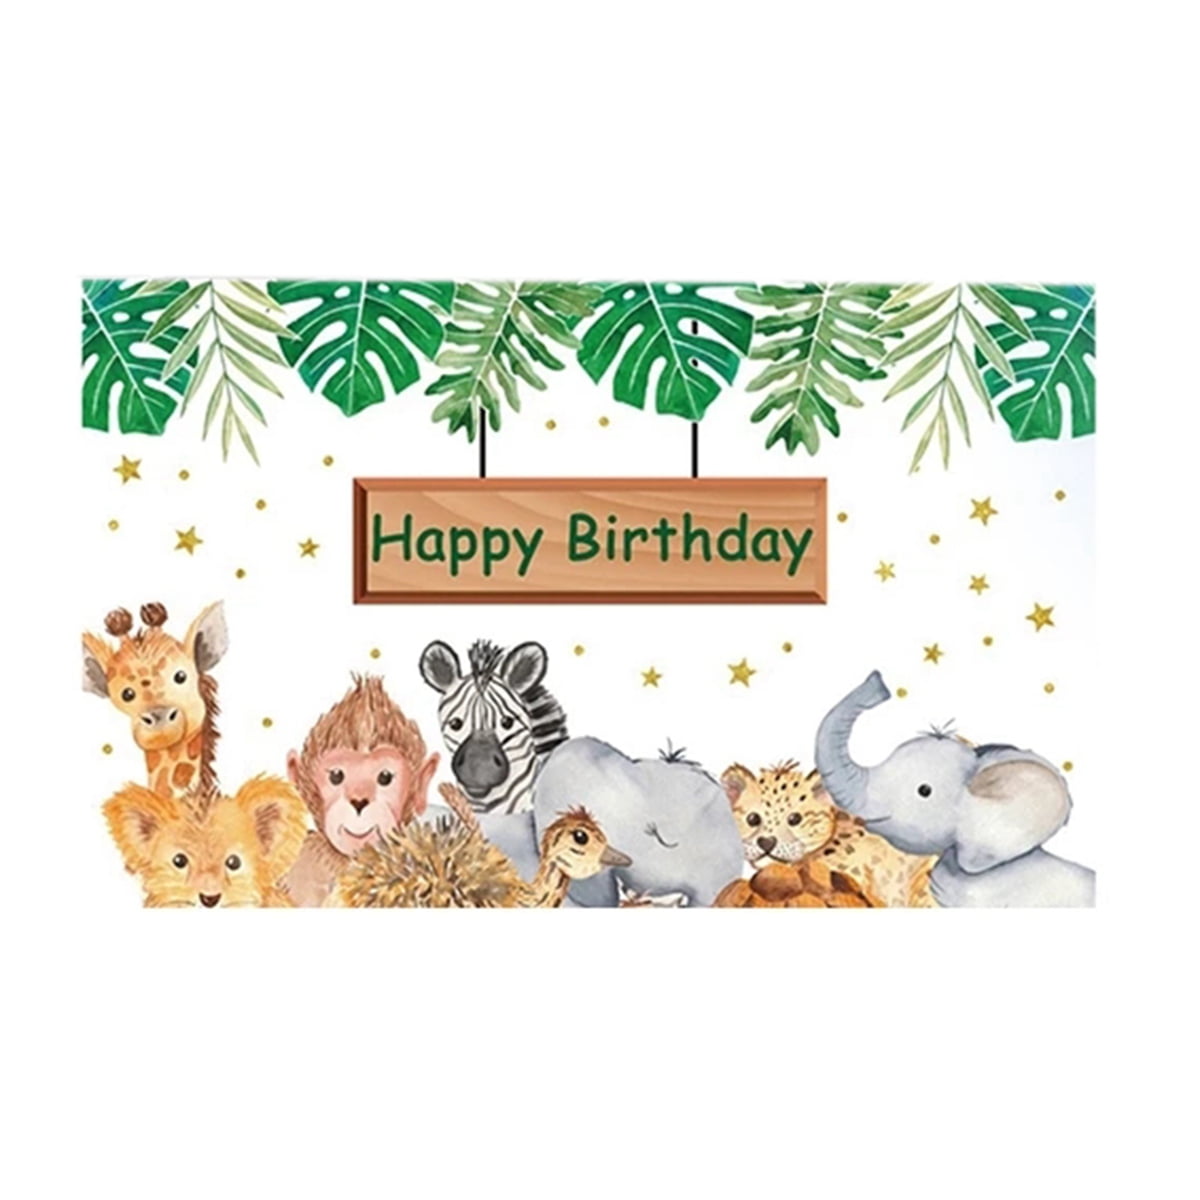 Curious Dinosaurs Photography Background Safari Jungle Theme Birthday Party Background Tropical Curious Dinosaurs Cake Table Decoration